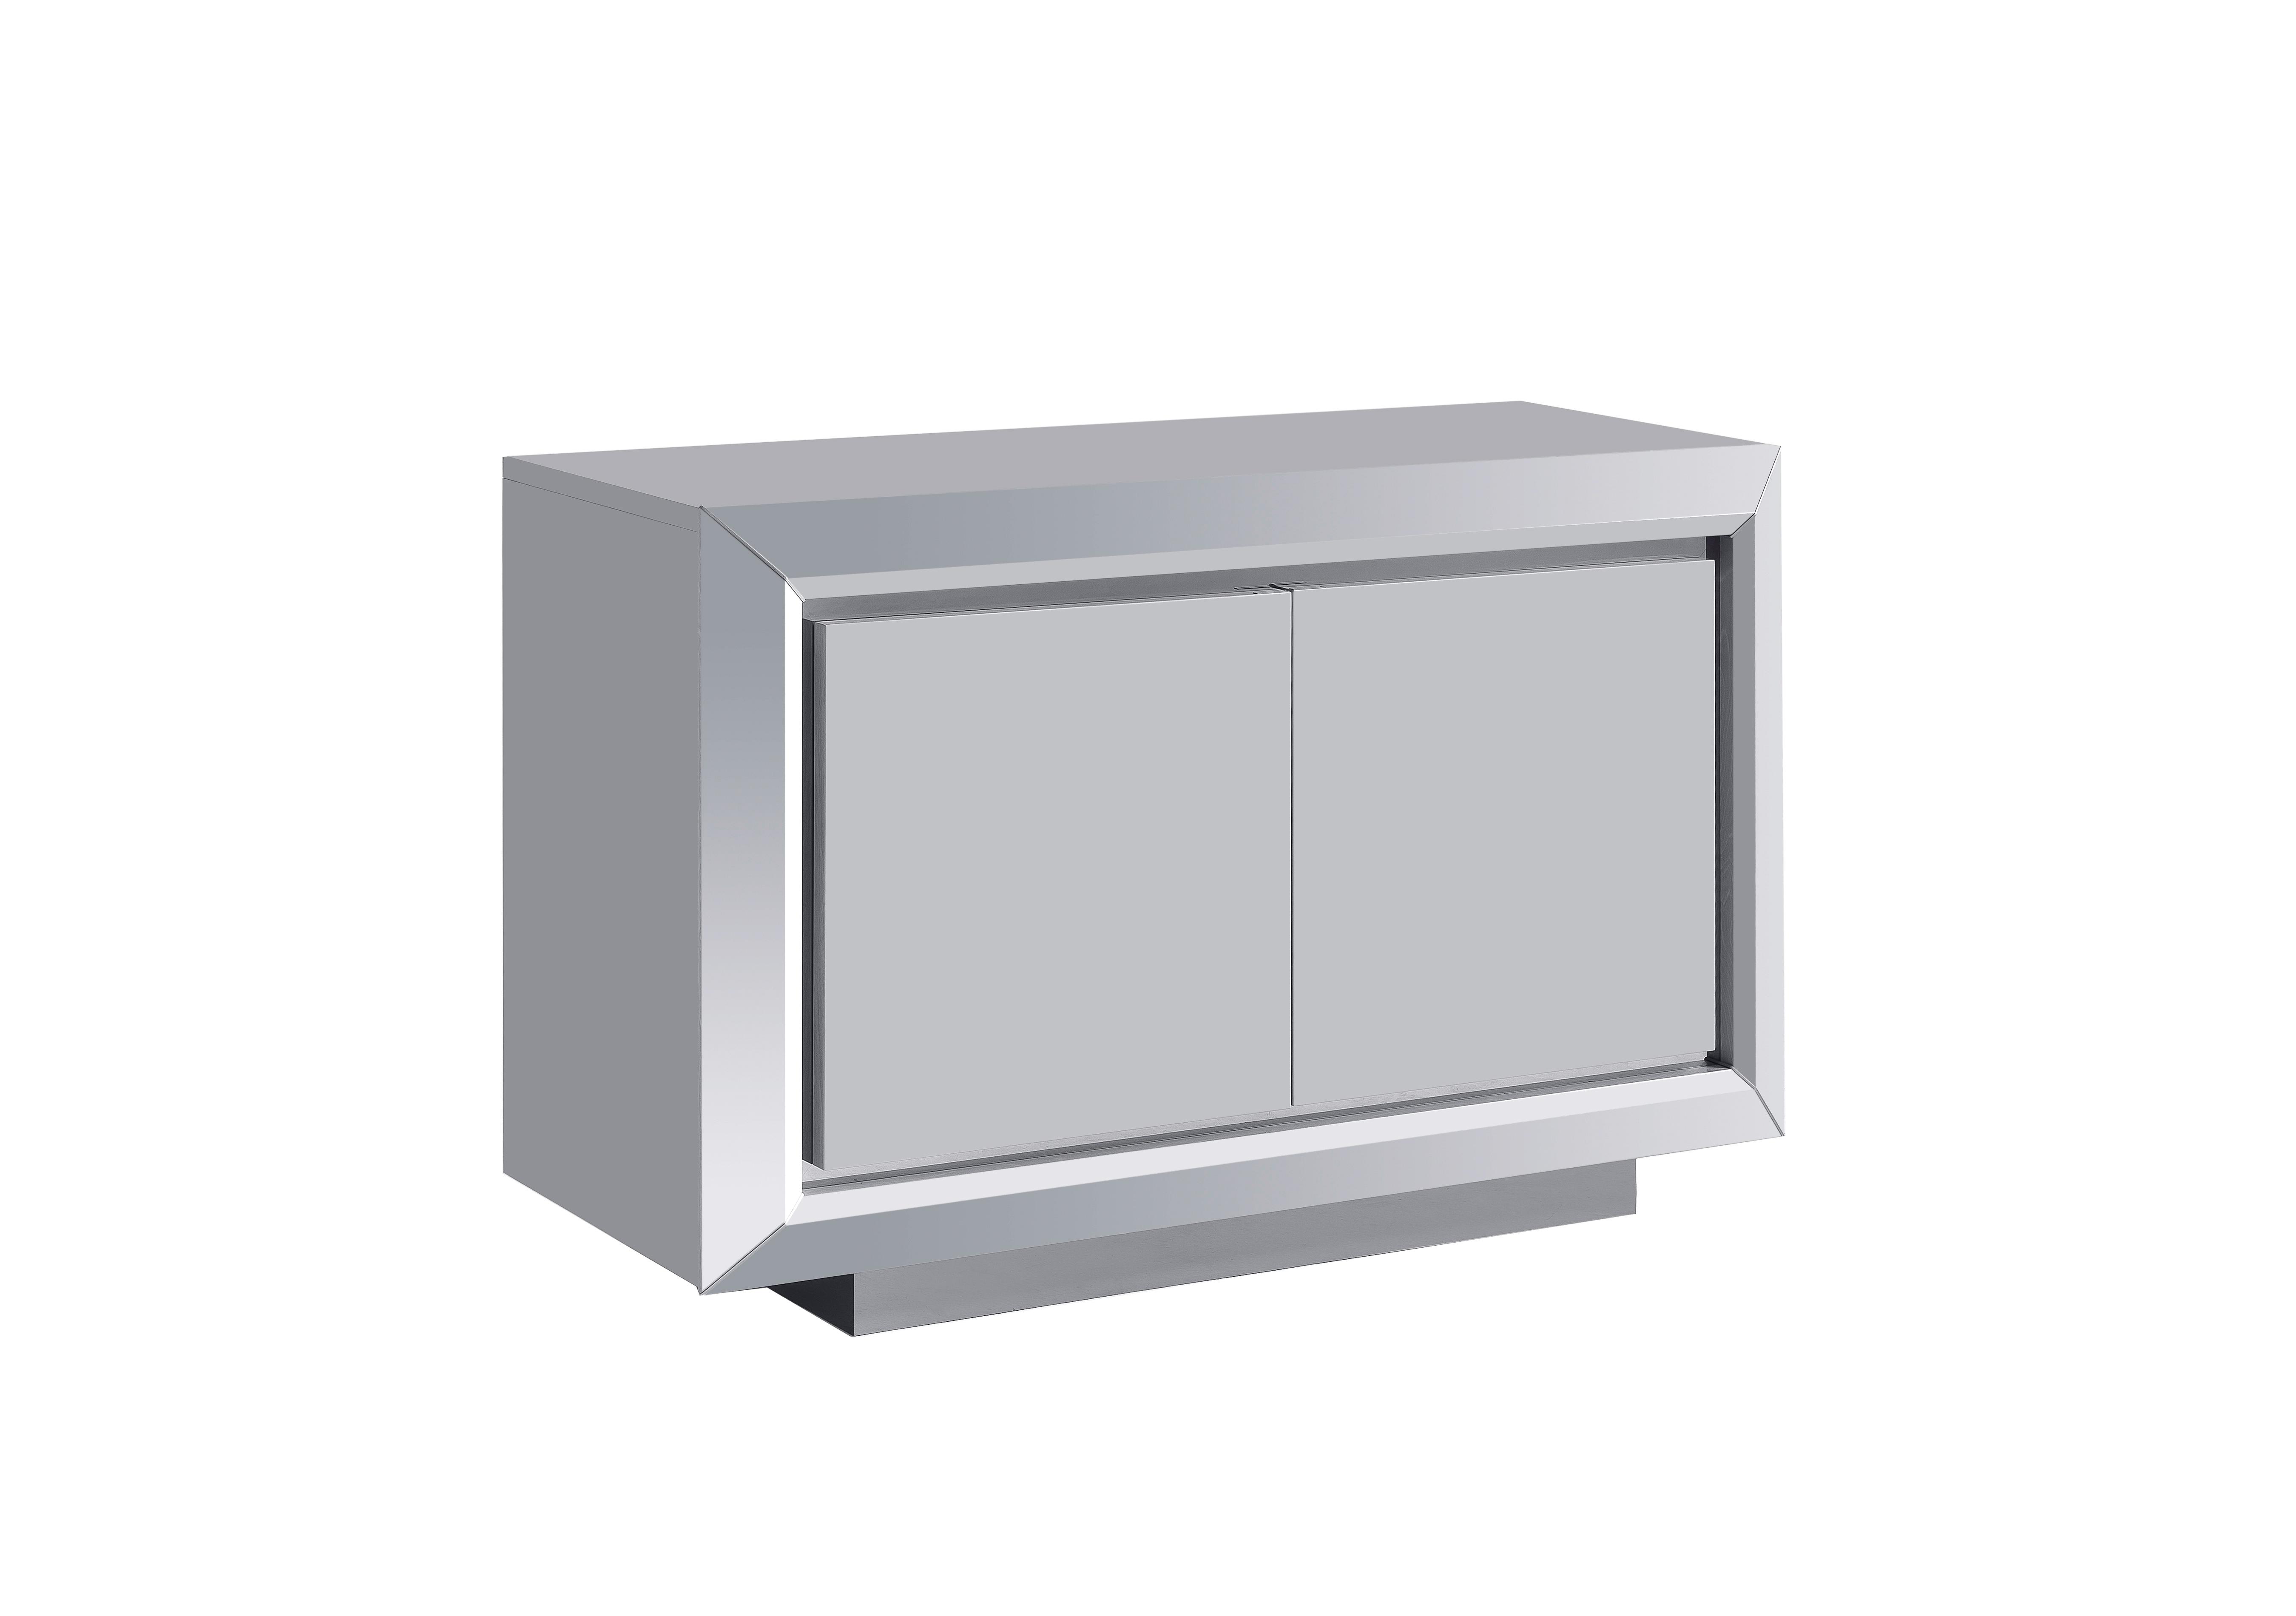 Palazzo Small Sideboard in Glossy White on Furniture Village